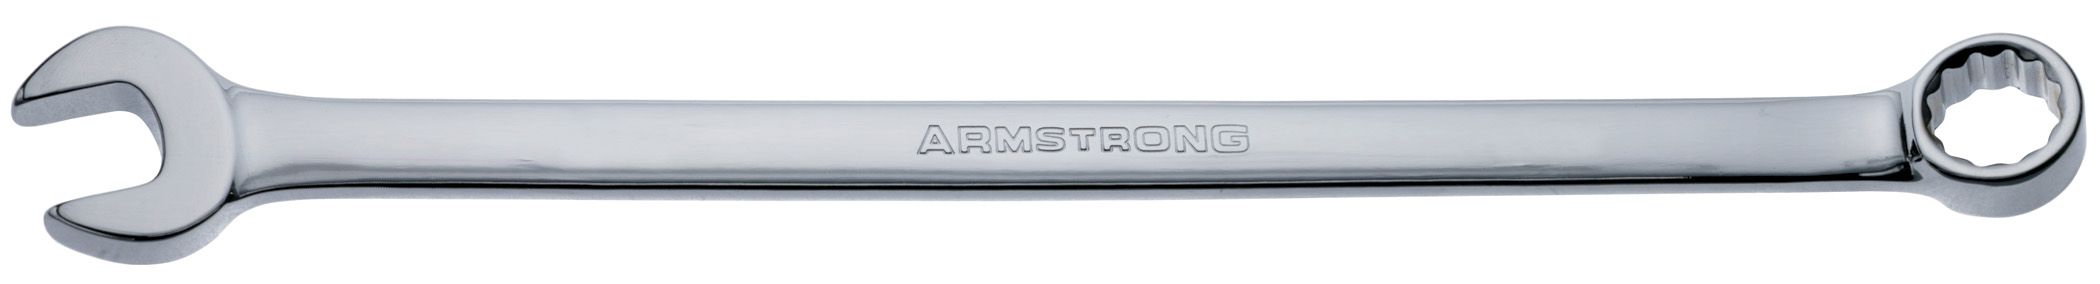 Armstrong 12 mm 12 pt. Full Polish Extra Long Combination Wrench